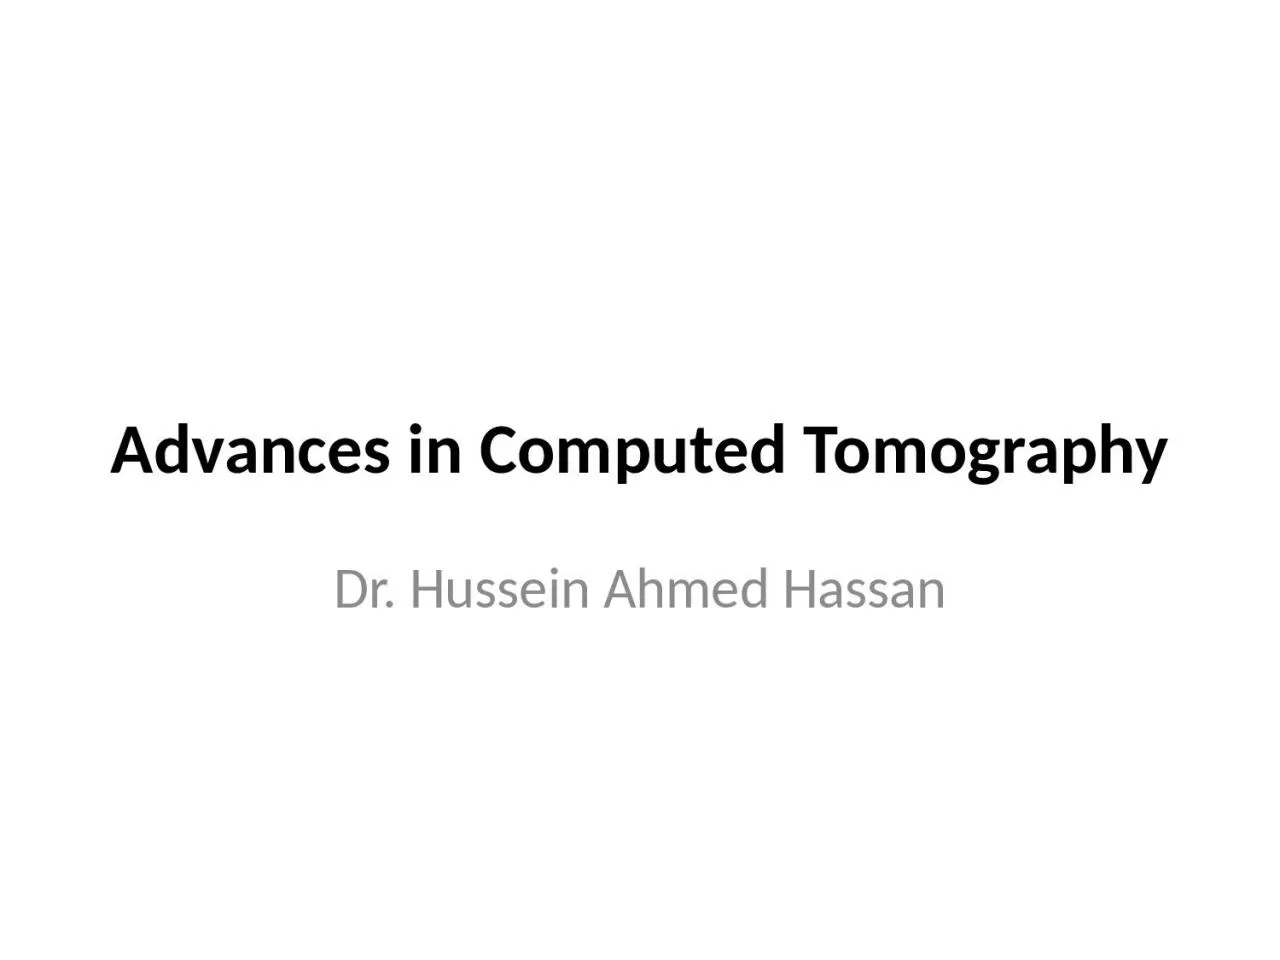 Advances in Computed Tomography